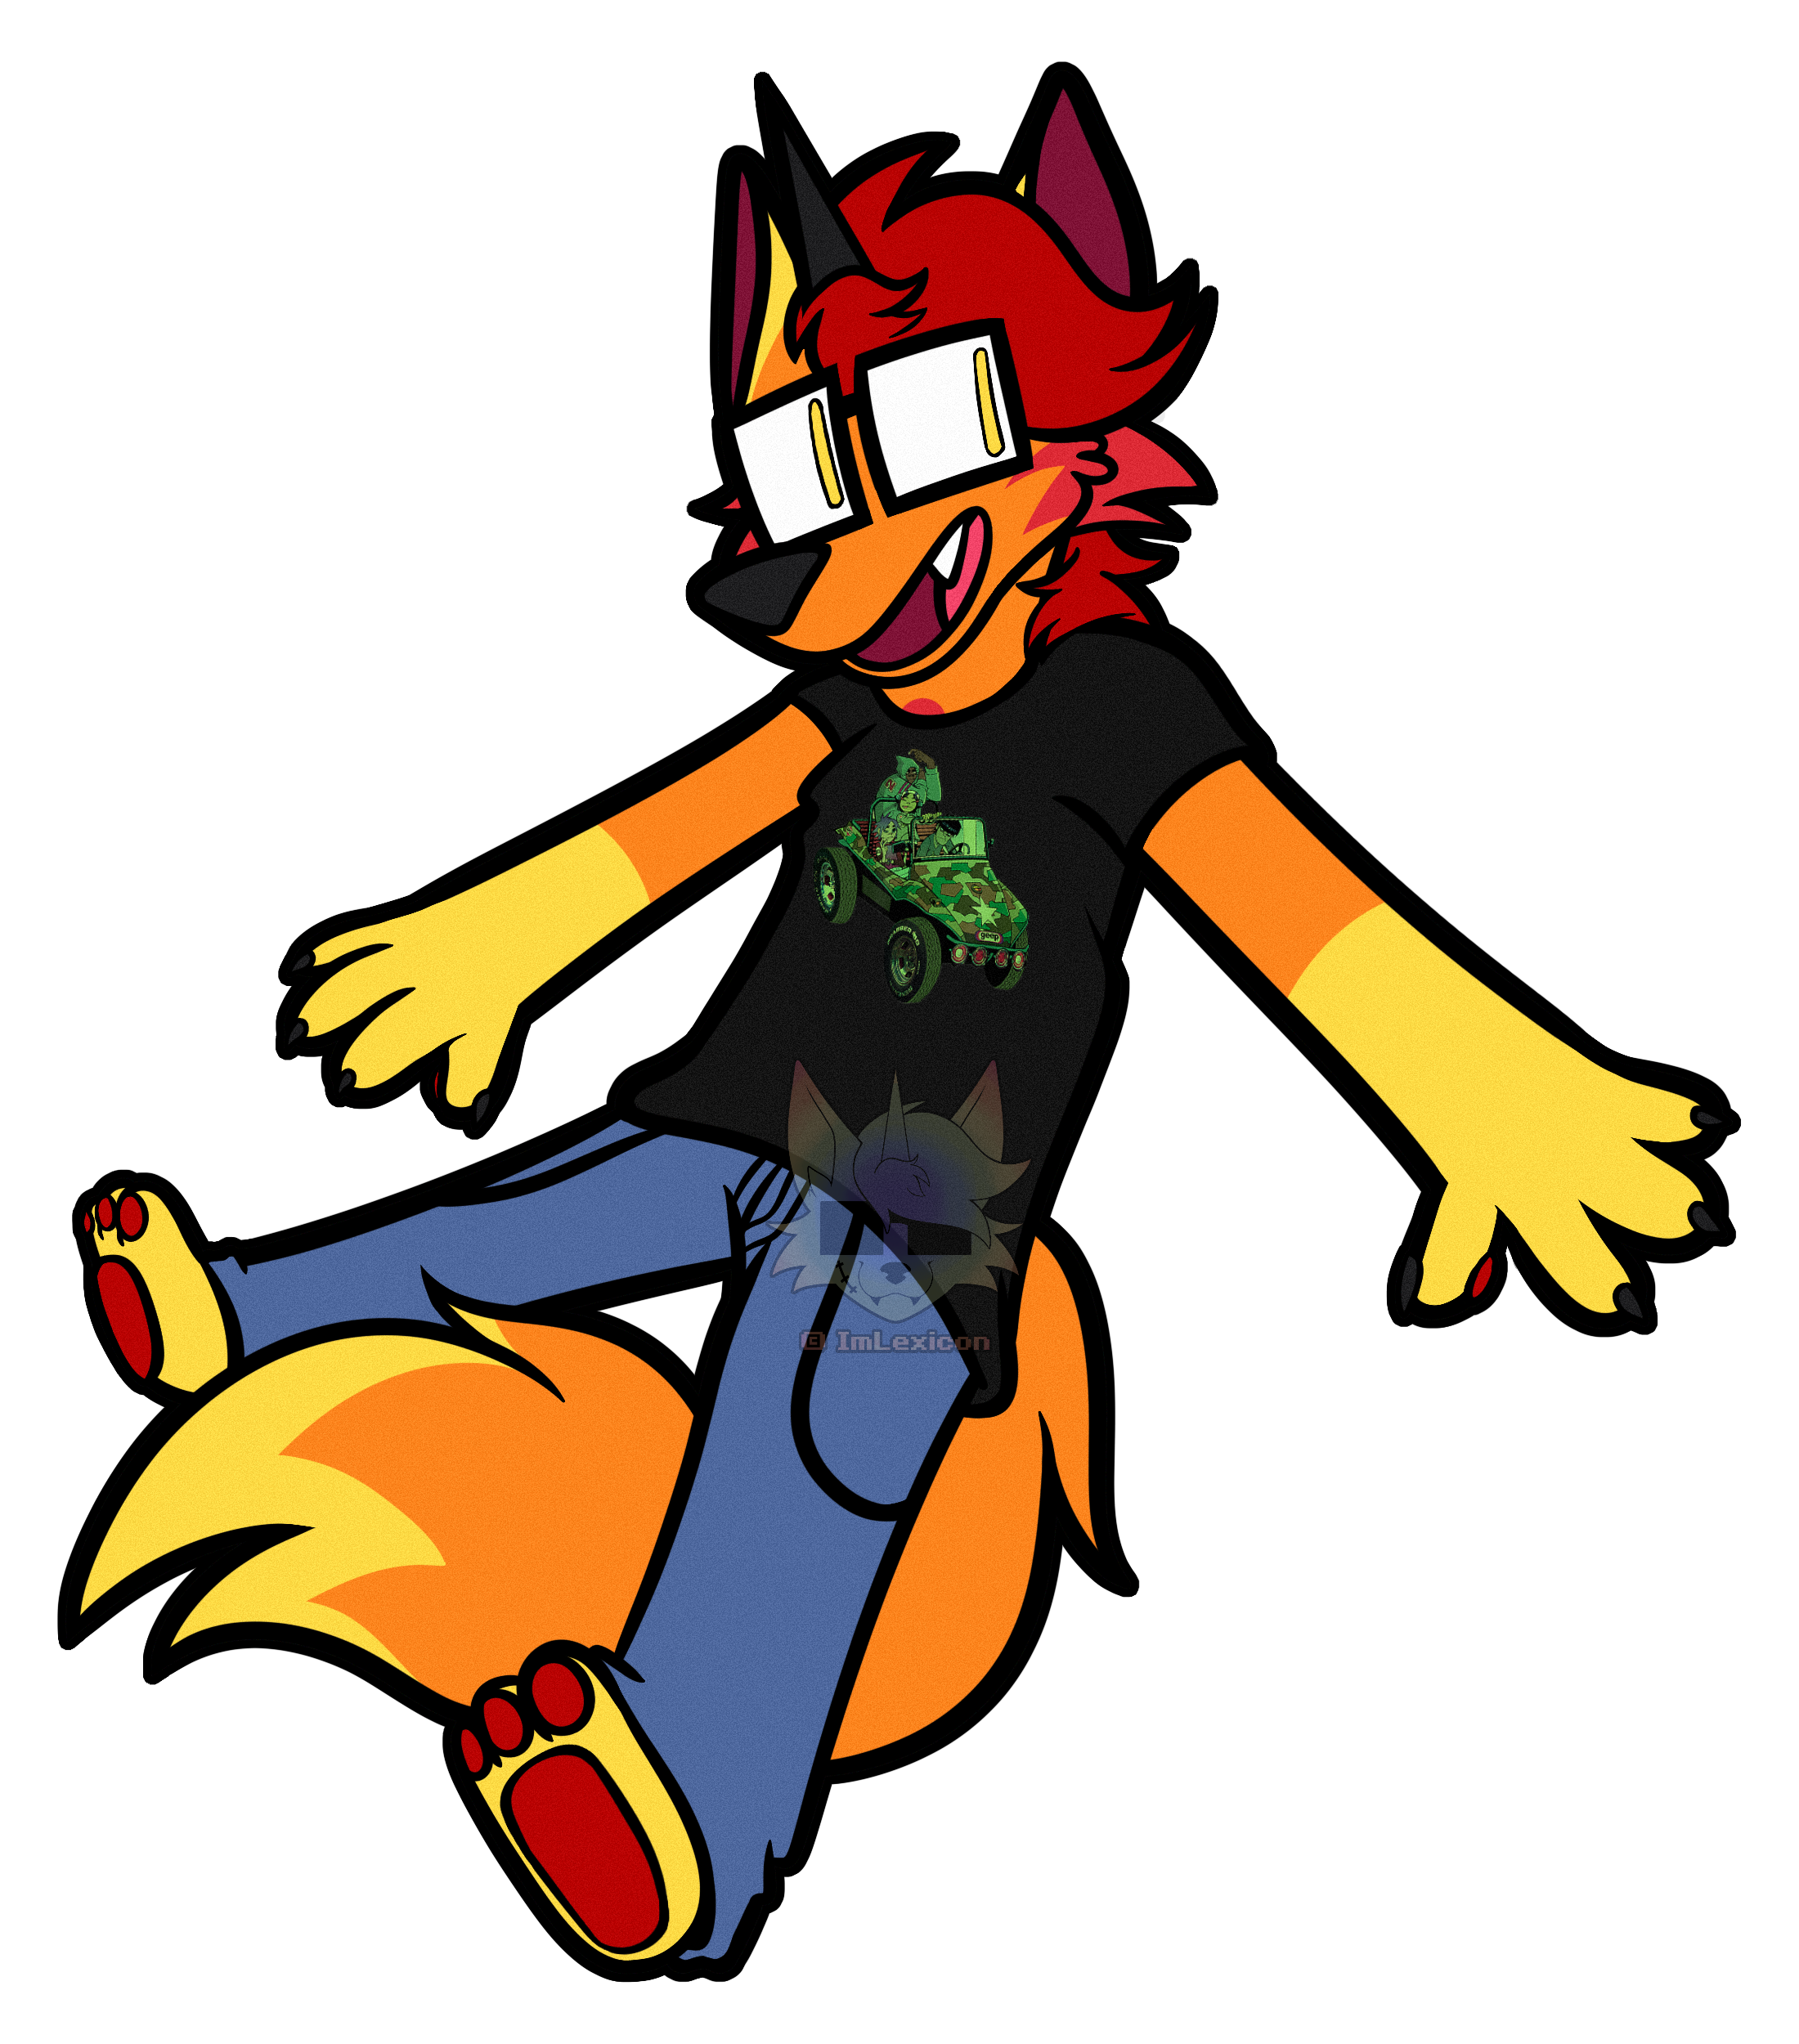 A digital fullbody drawing of Lexicon, an anthropomorphic unicorn fox. They are drawn in a cartoony style, looking away and smiling. They are wearing a black Gorillaz t-shirt and blue denim jeans.